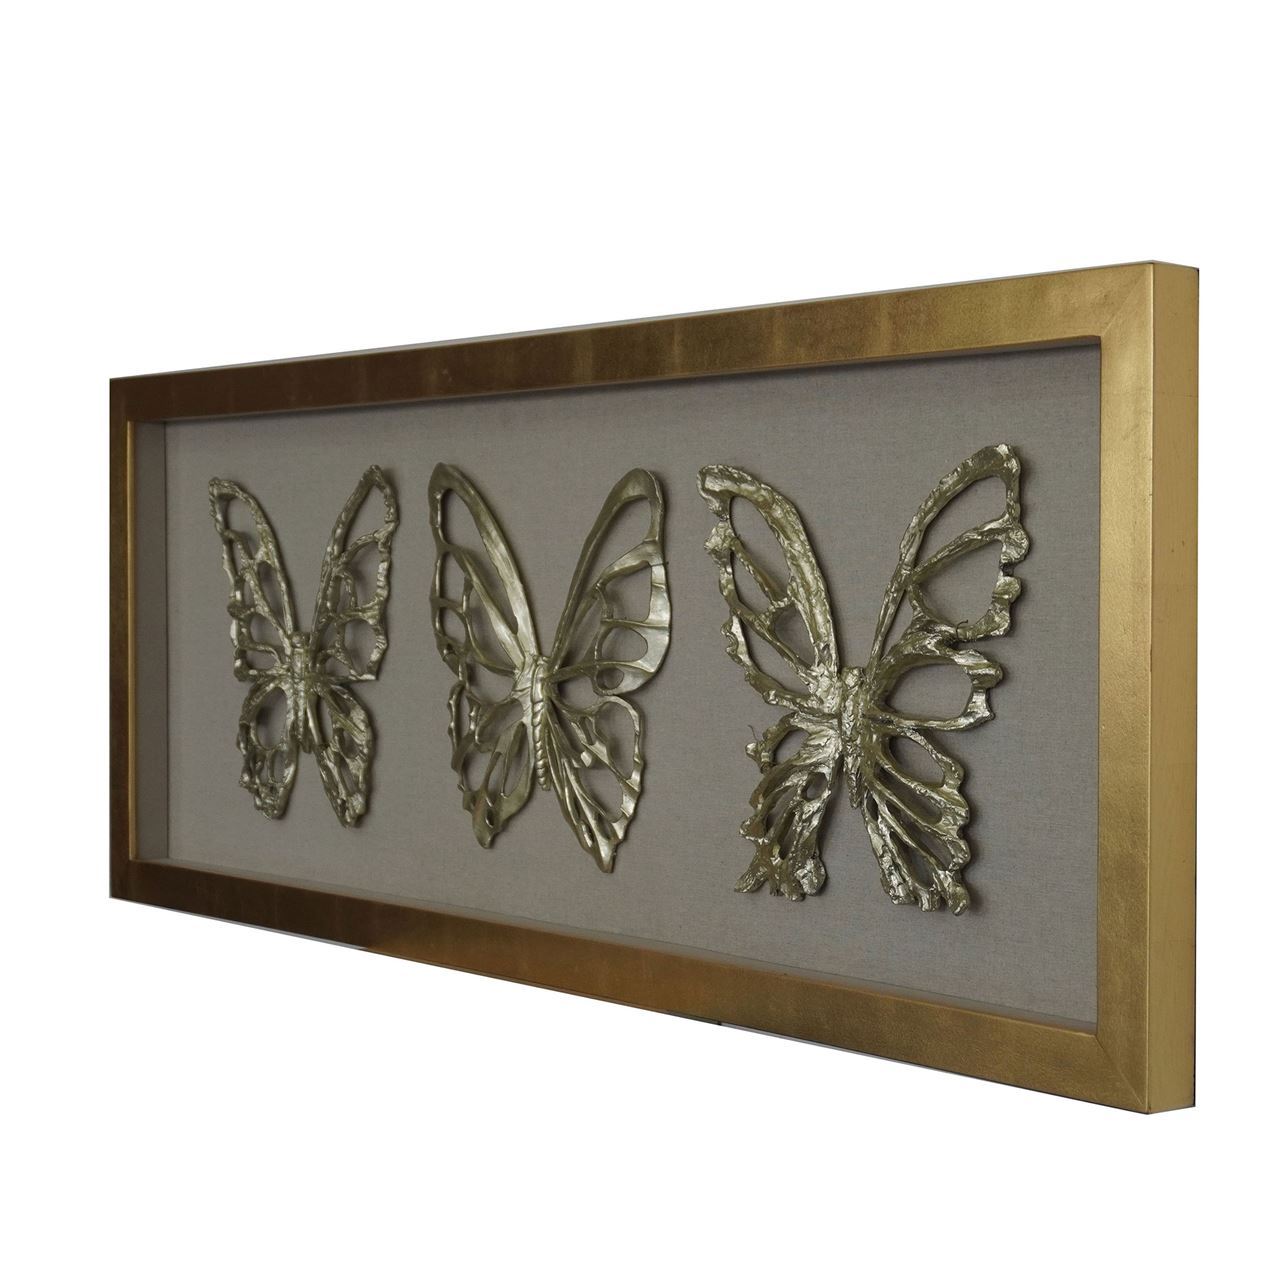 Huji Home Products. Wood Carving Butterfly Trio Shadow Box Wall Décor